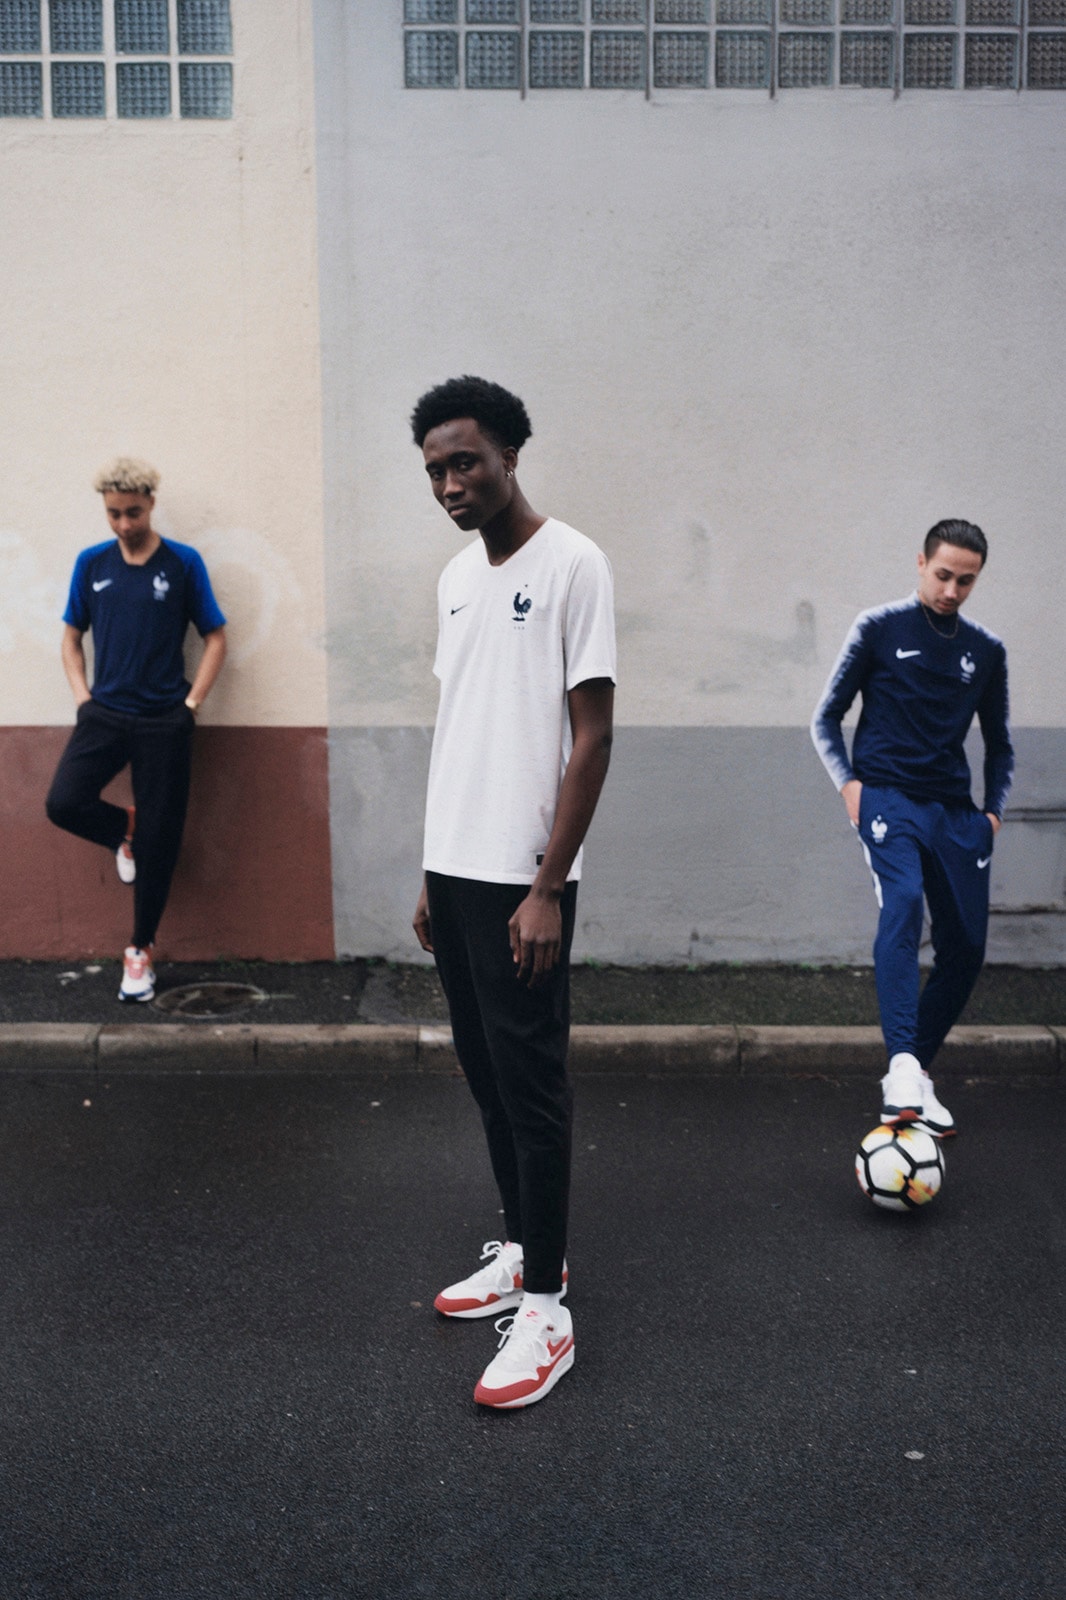 Nike's World Cup 2018 kits for France are designed to express